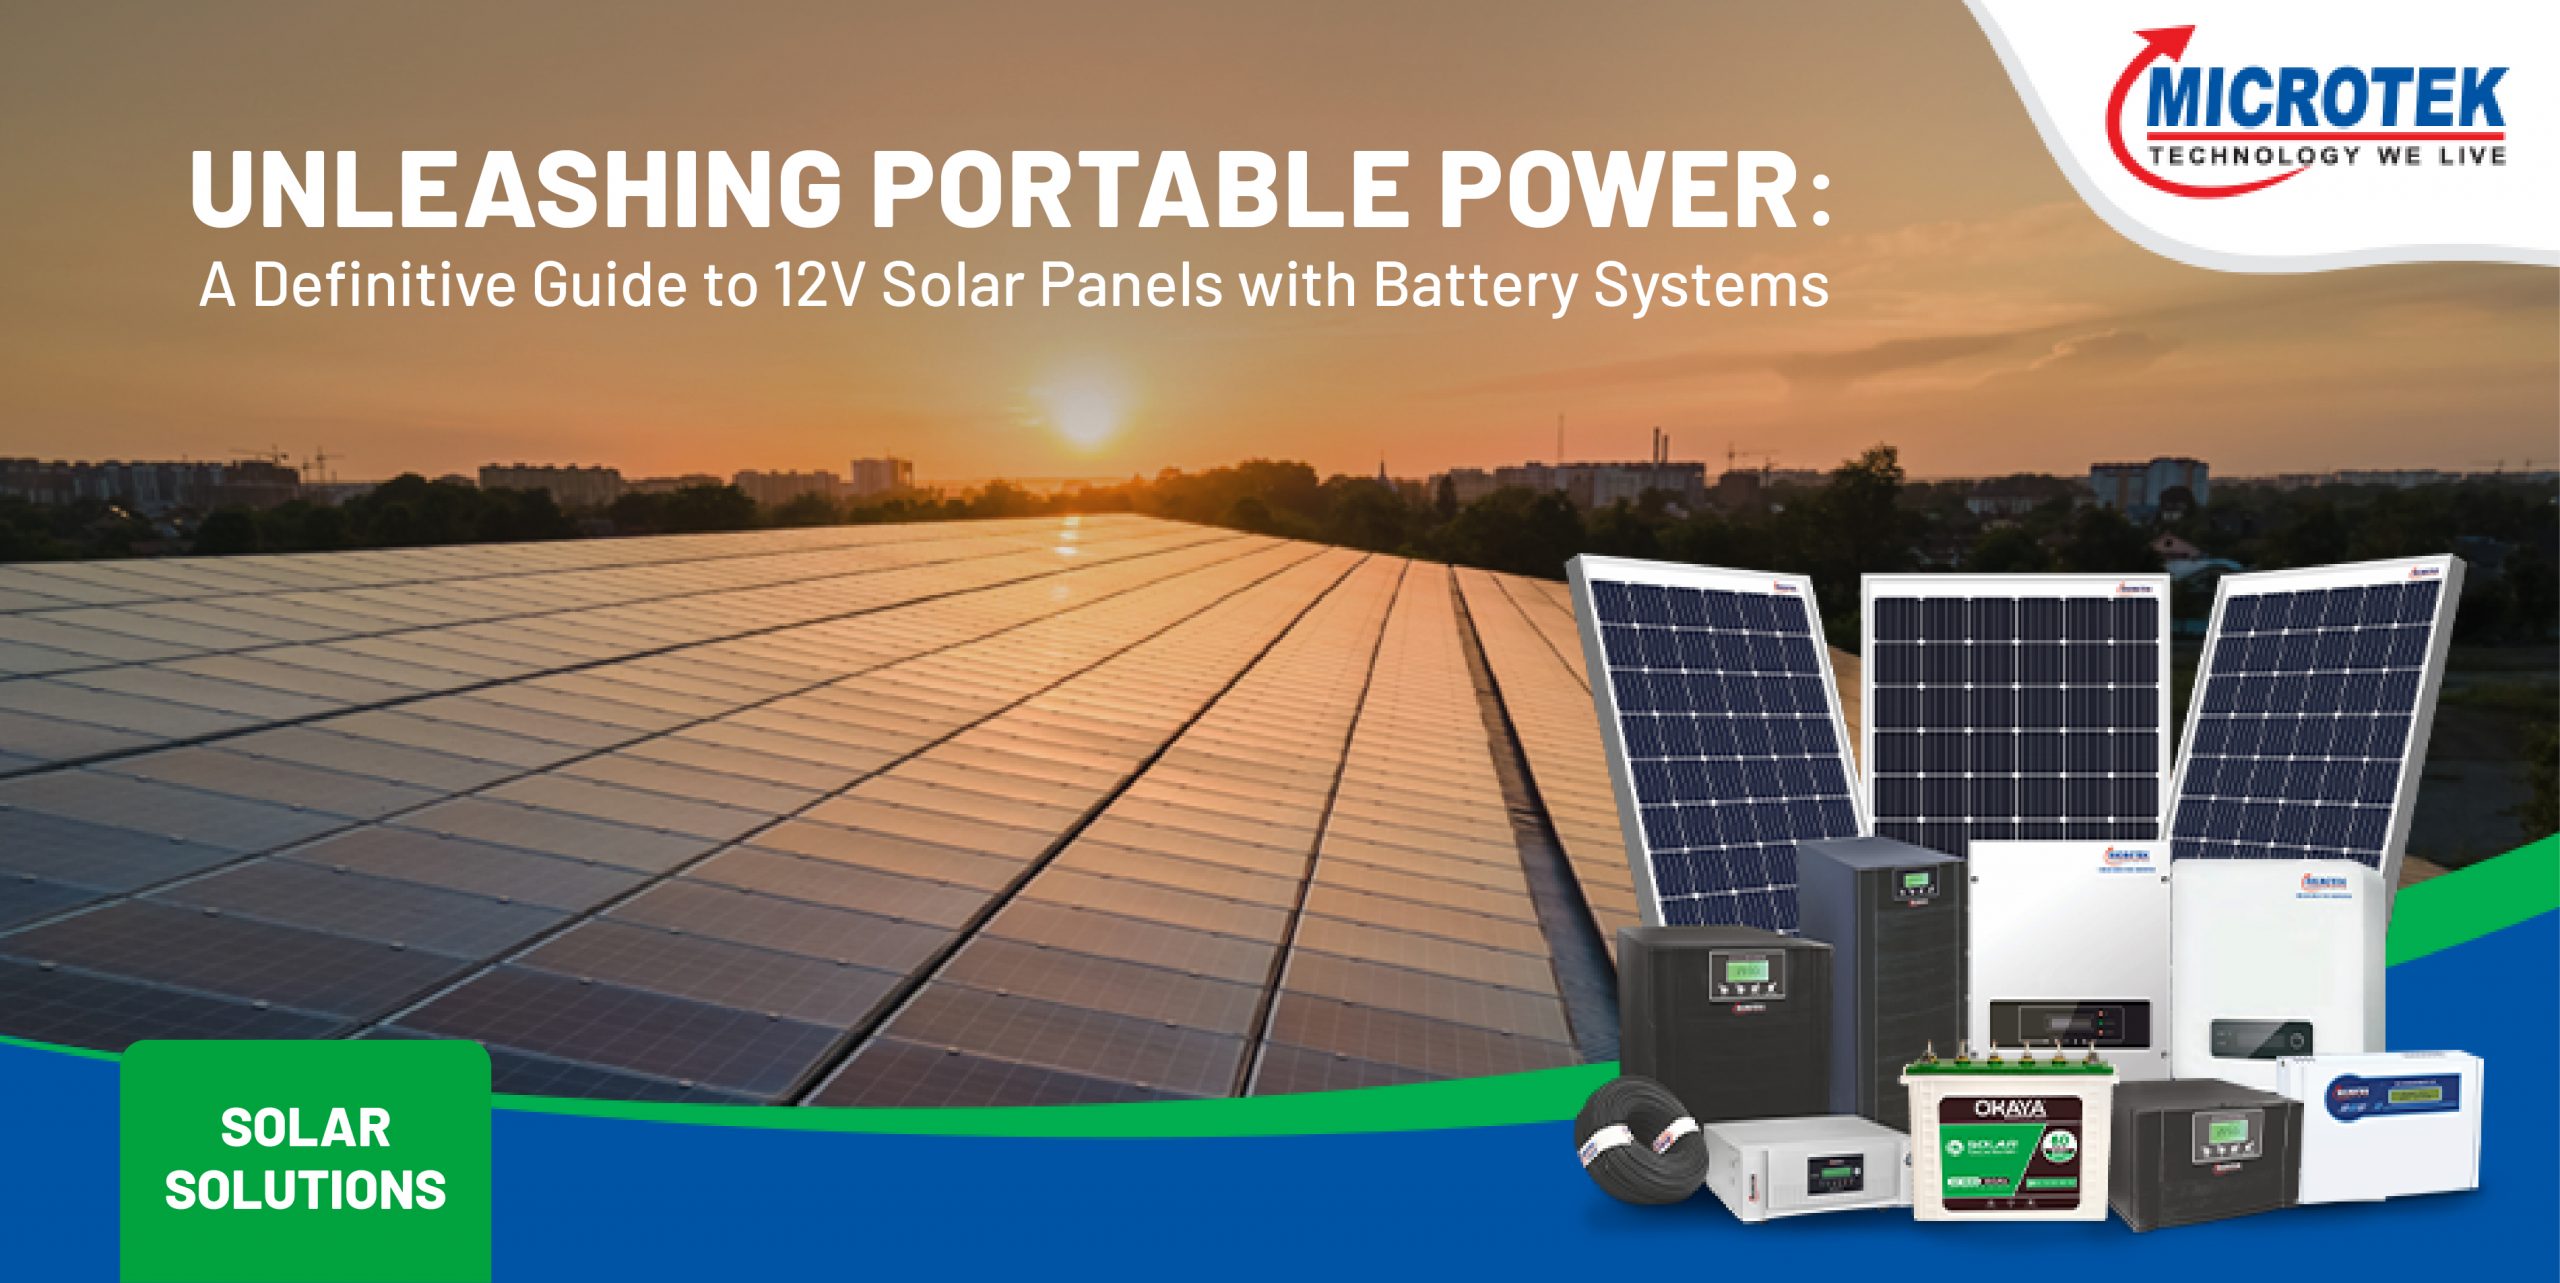 Unleashing Portable Power: A Definitive Guide to 12V Solar Panels with Battery Systems